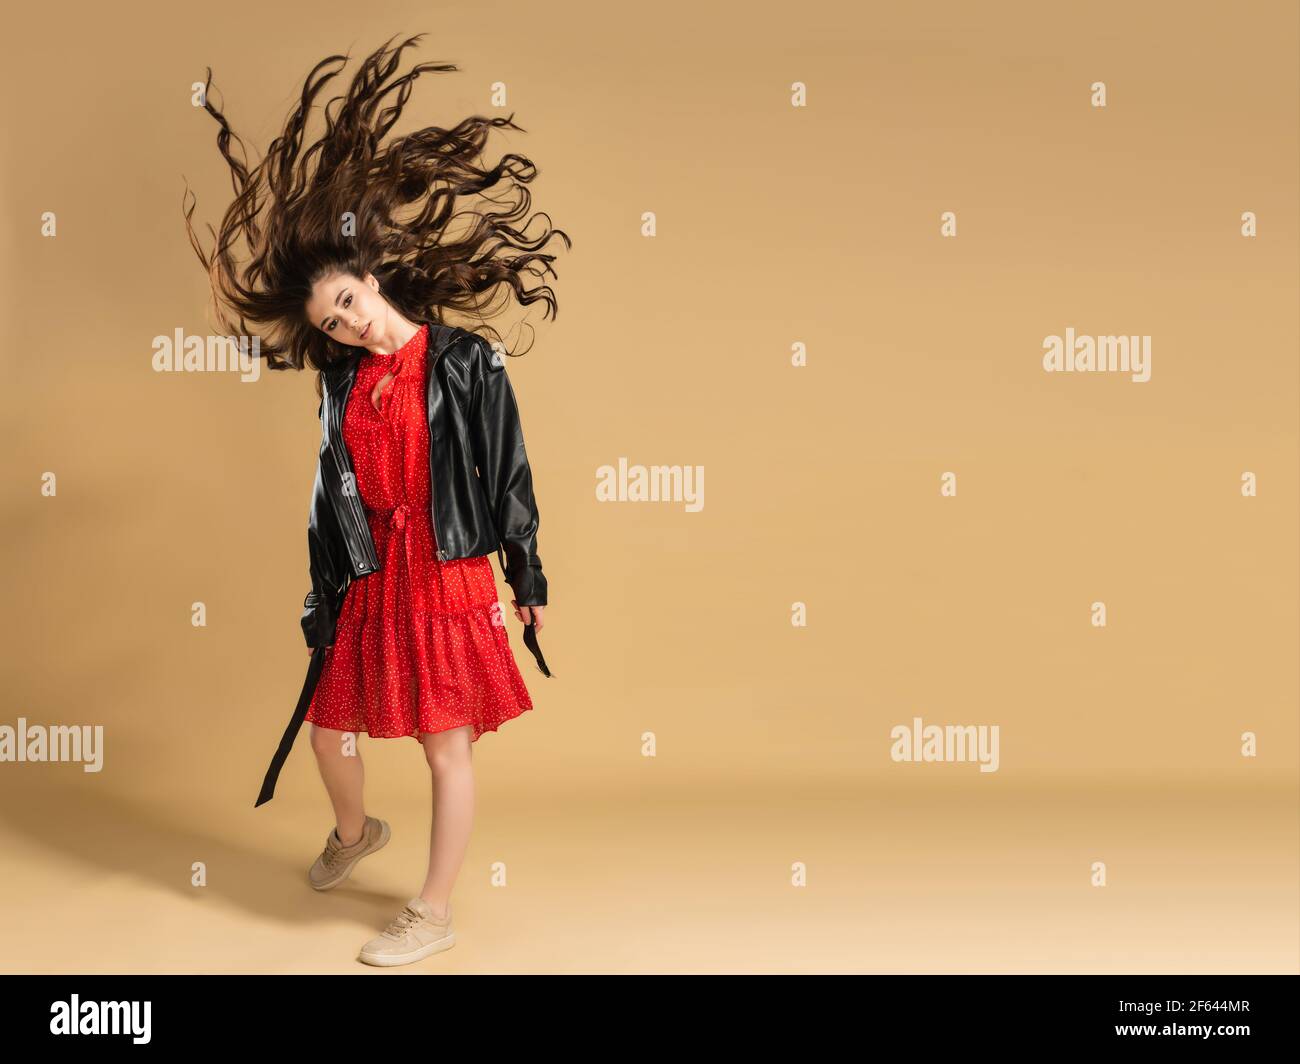 Young beautiful girl in a red dress with polka dots and a black leather jacket waving her long flowing hair on a pastel orange studio background. Stock Photo